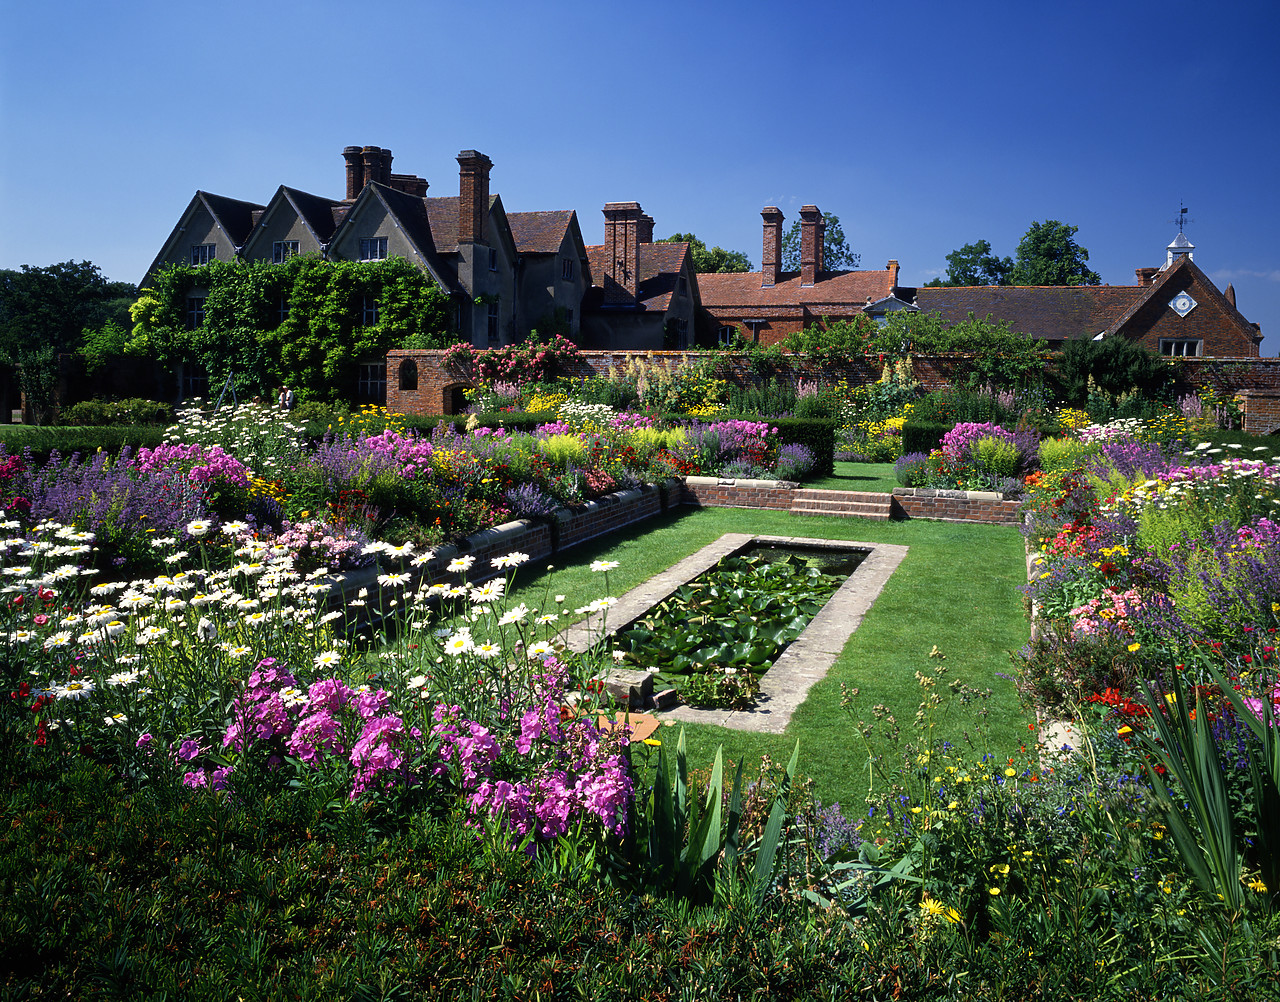 #892326-1 - Packwood House and Gardens, Lapworth, Warwickshire, England